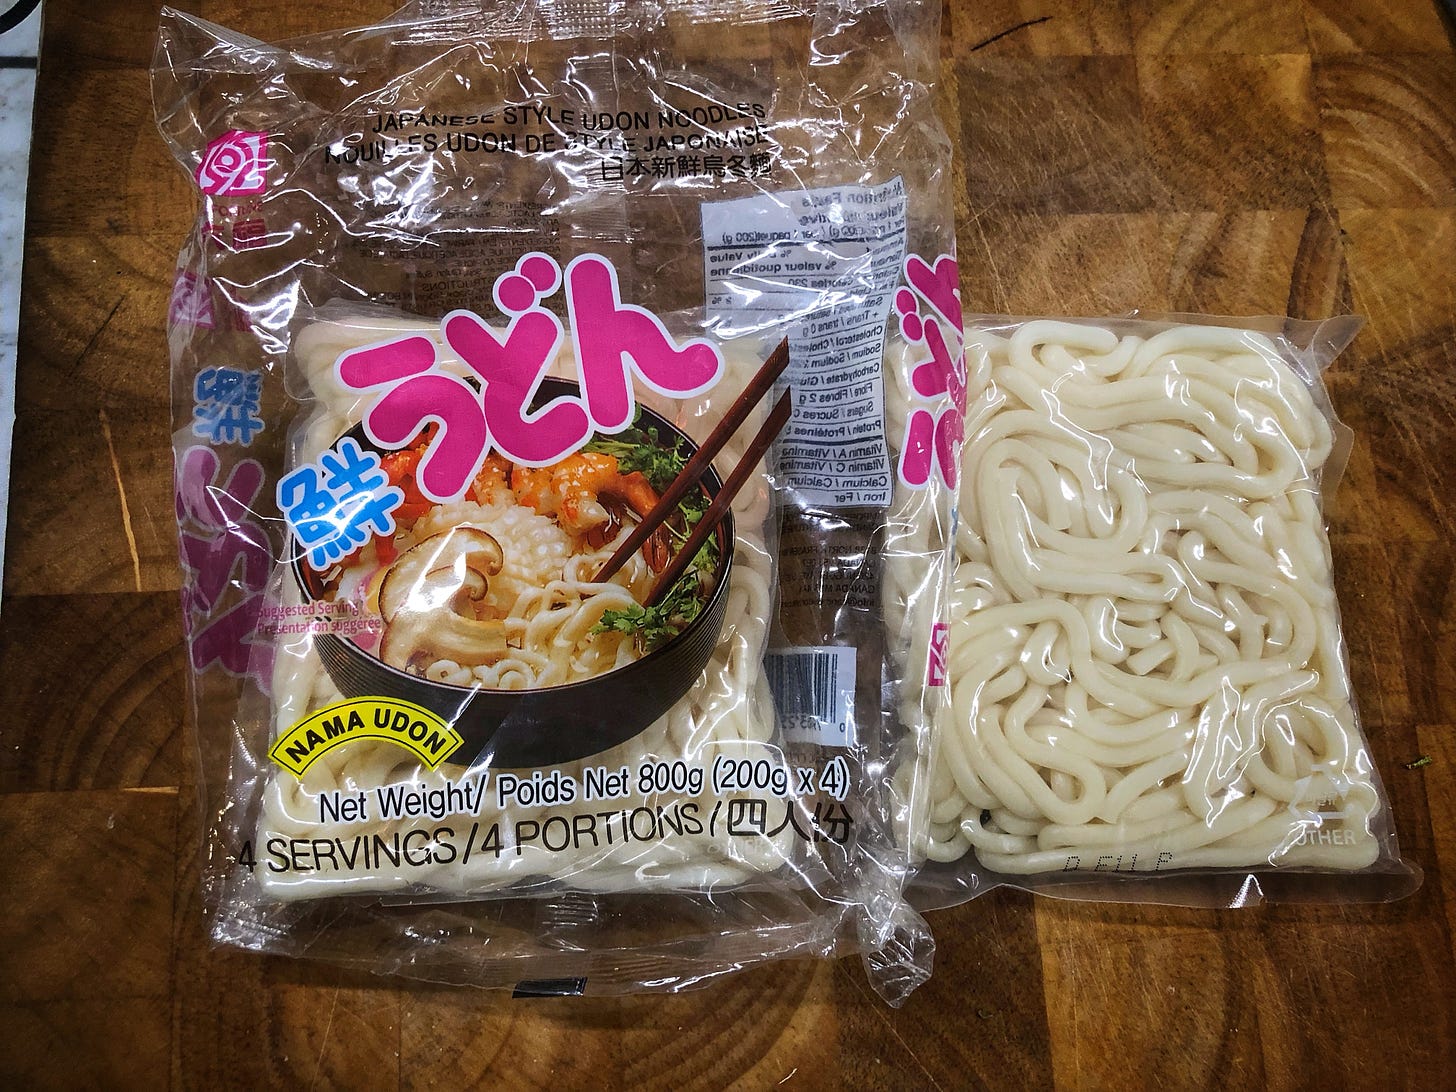 Two packages of pre-cooked, shelf-stable udon